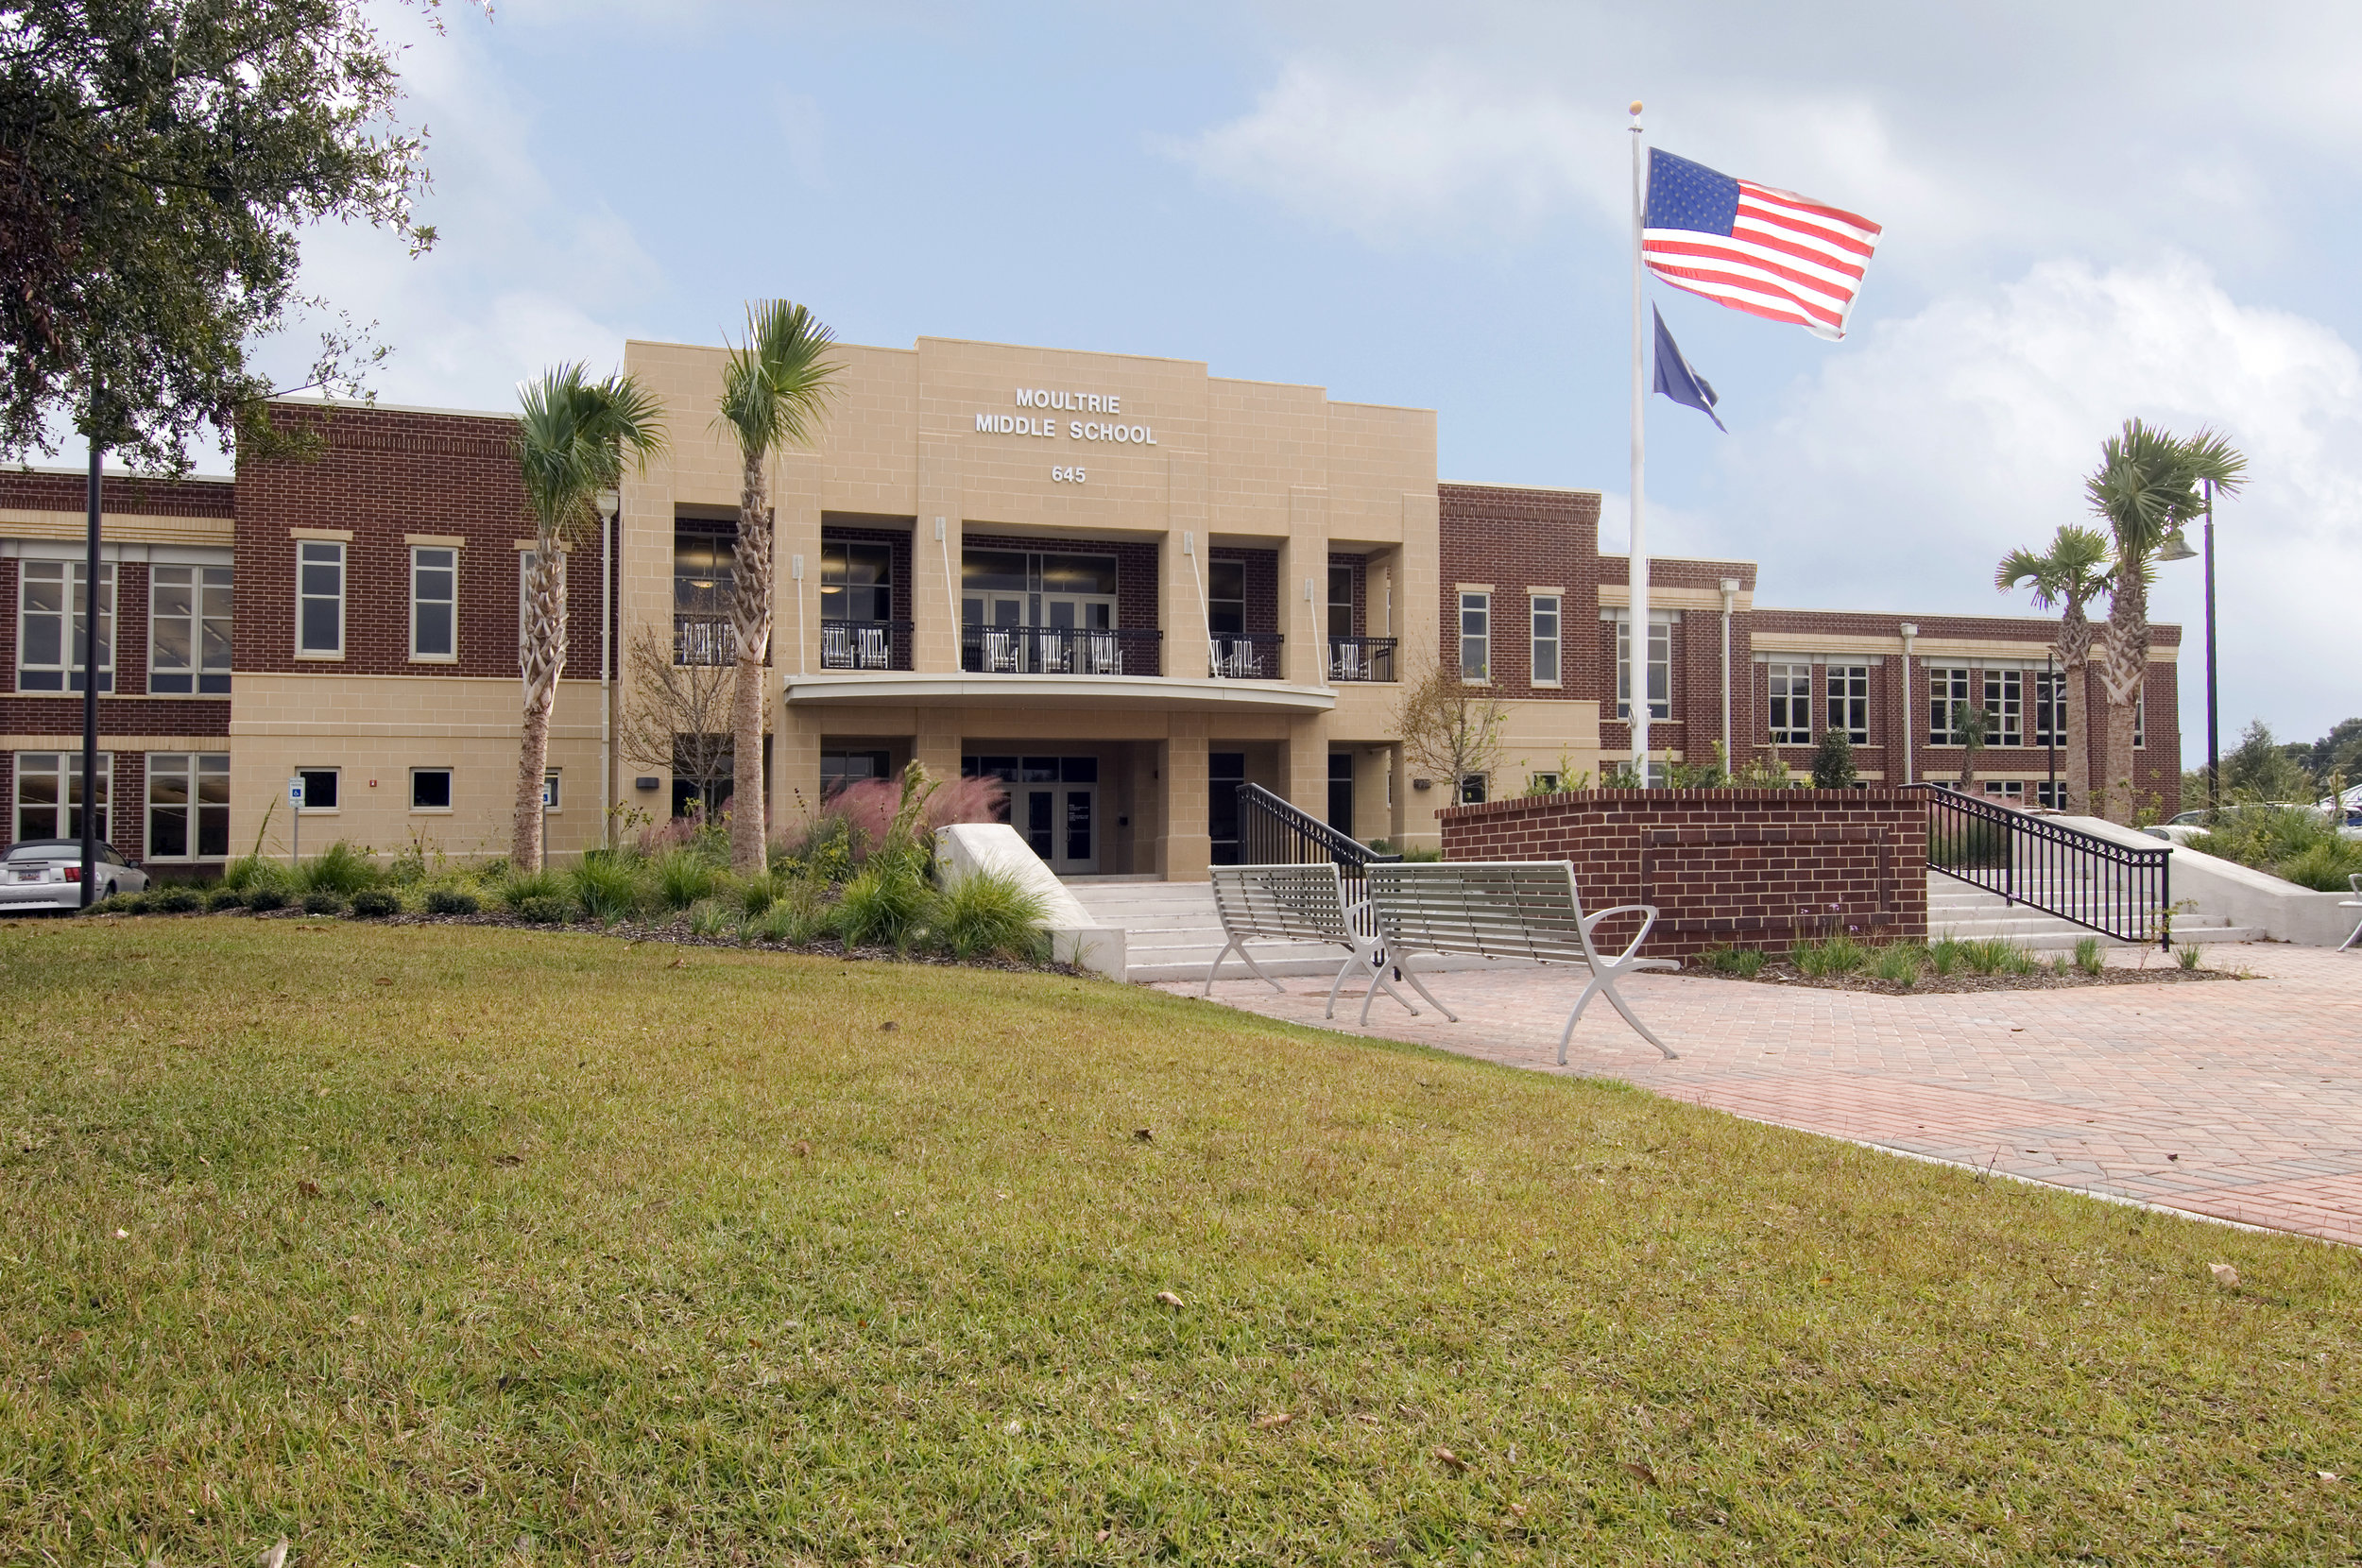 Moultrie Middle School